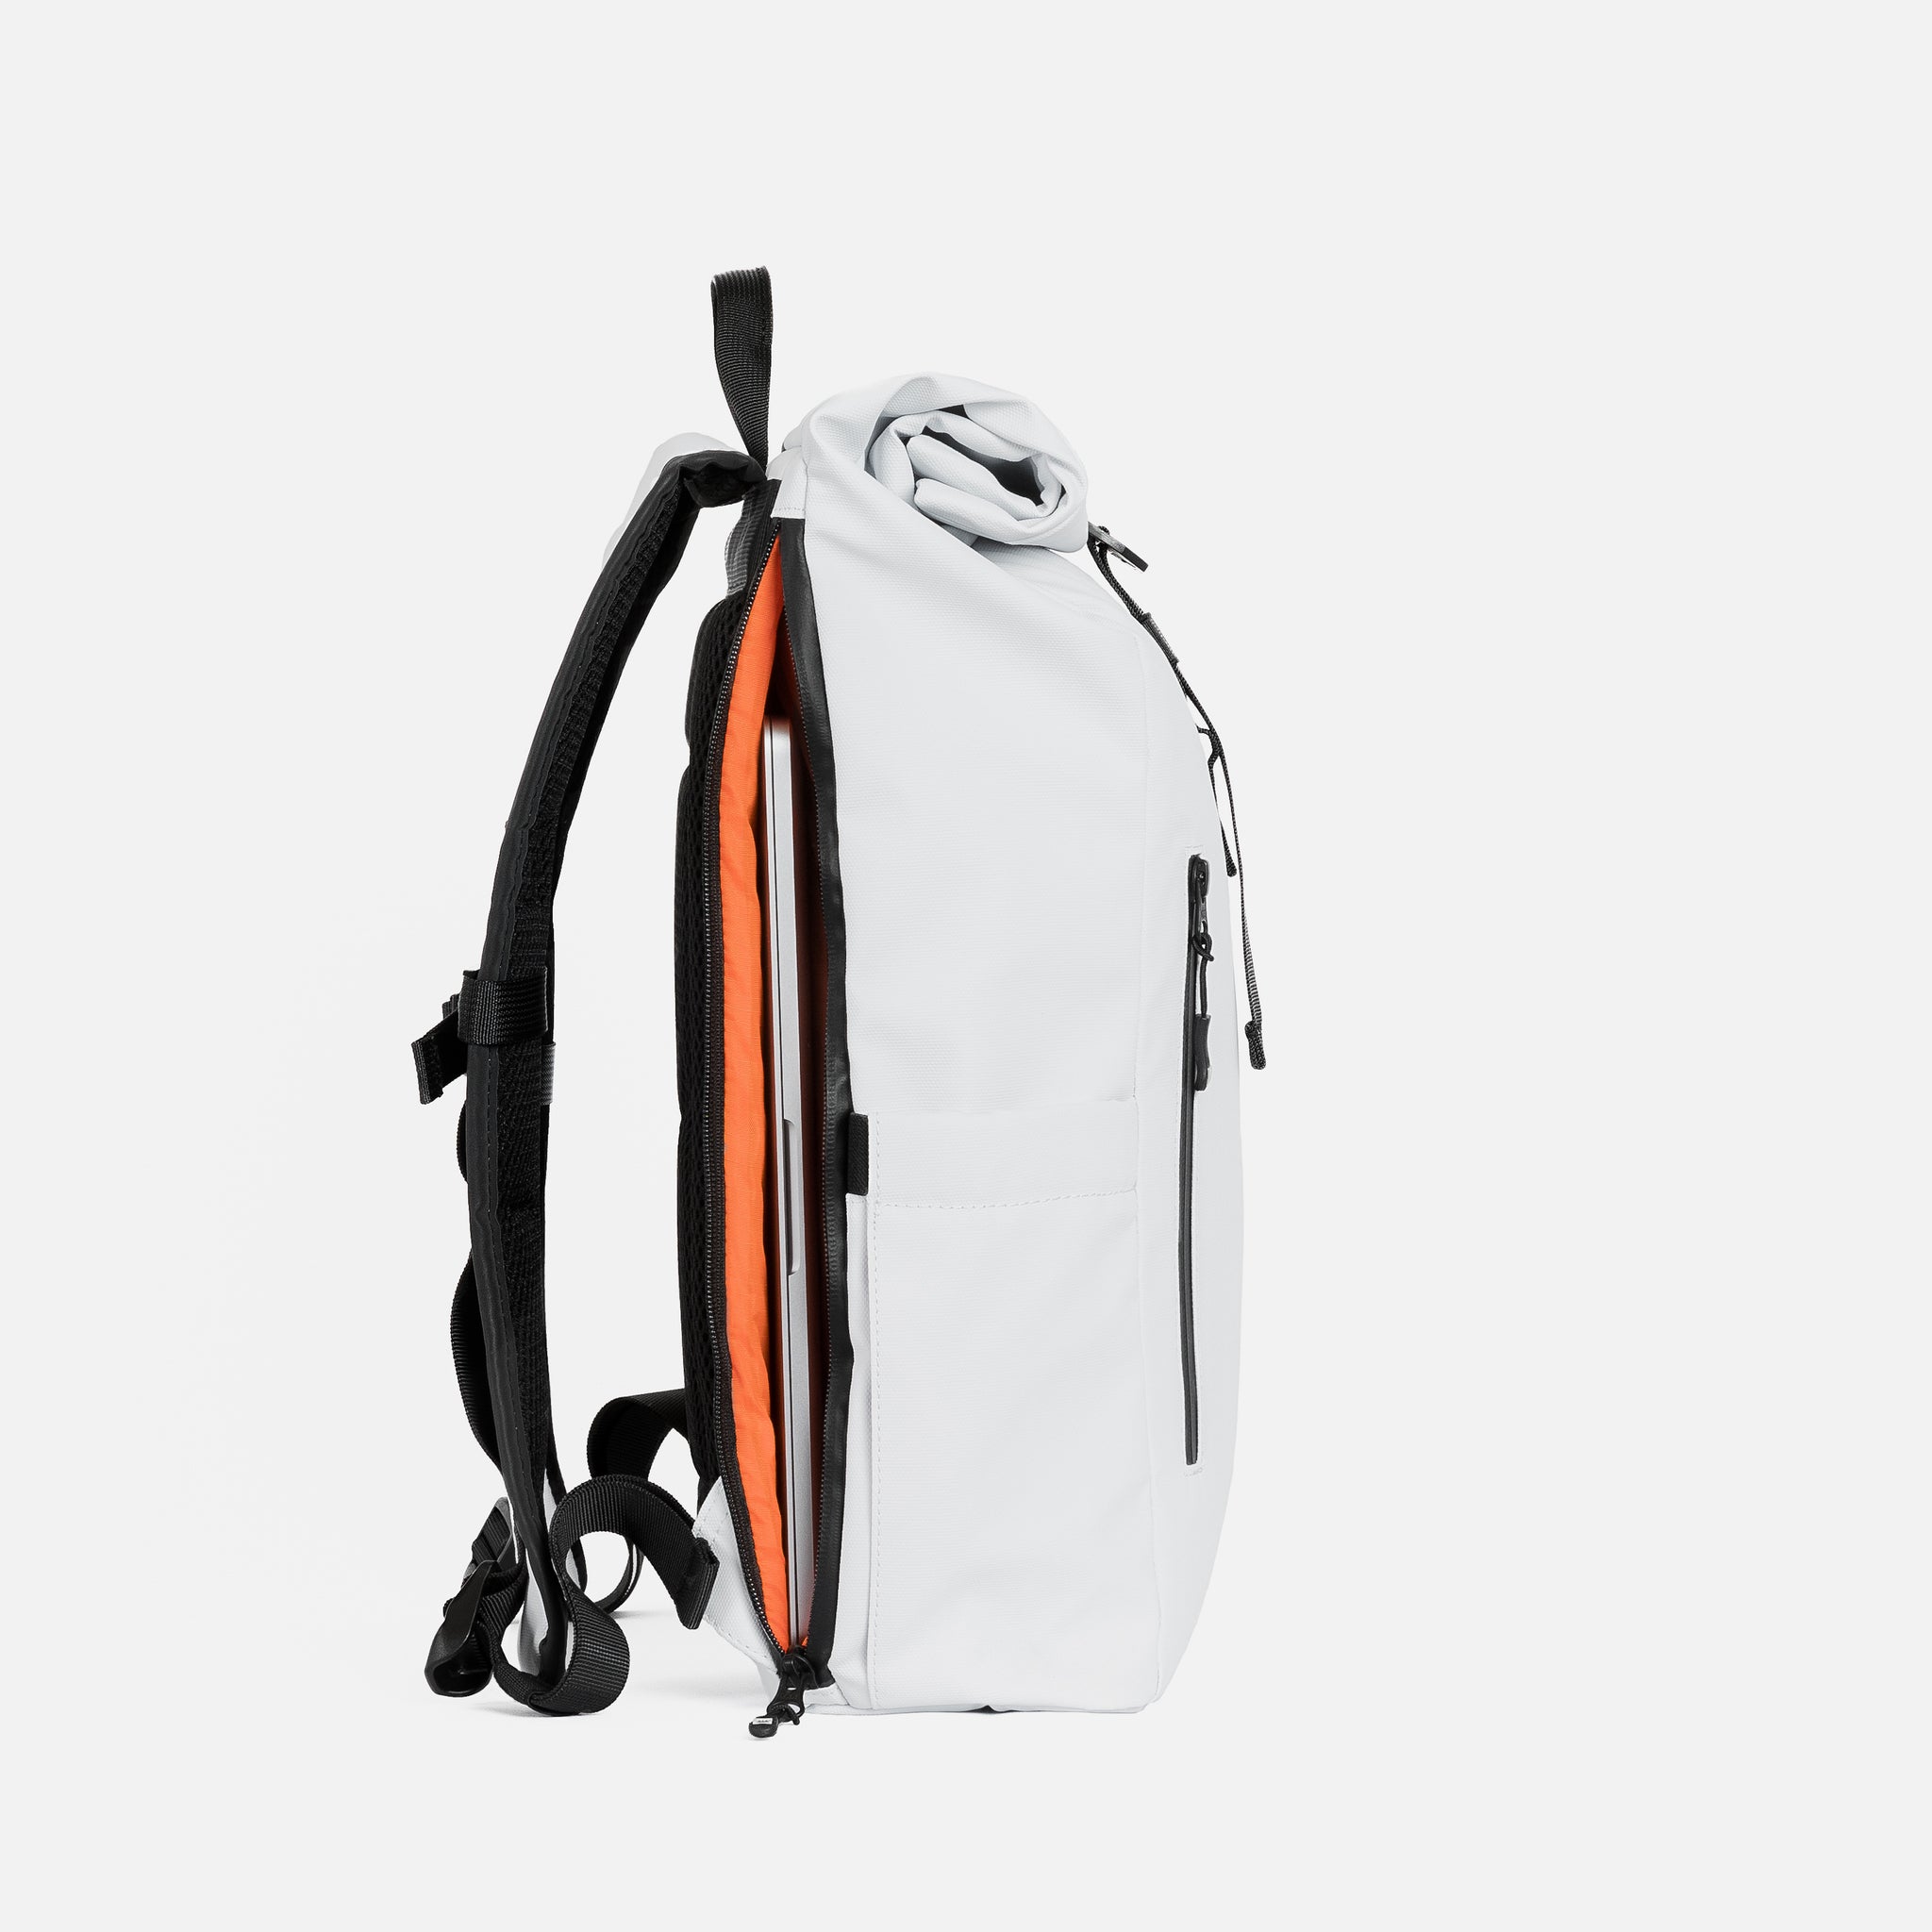 The side profile of the Roll Top Mini and its laptop compartment backpack in Arctic White